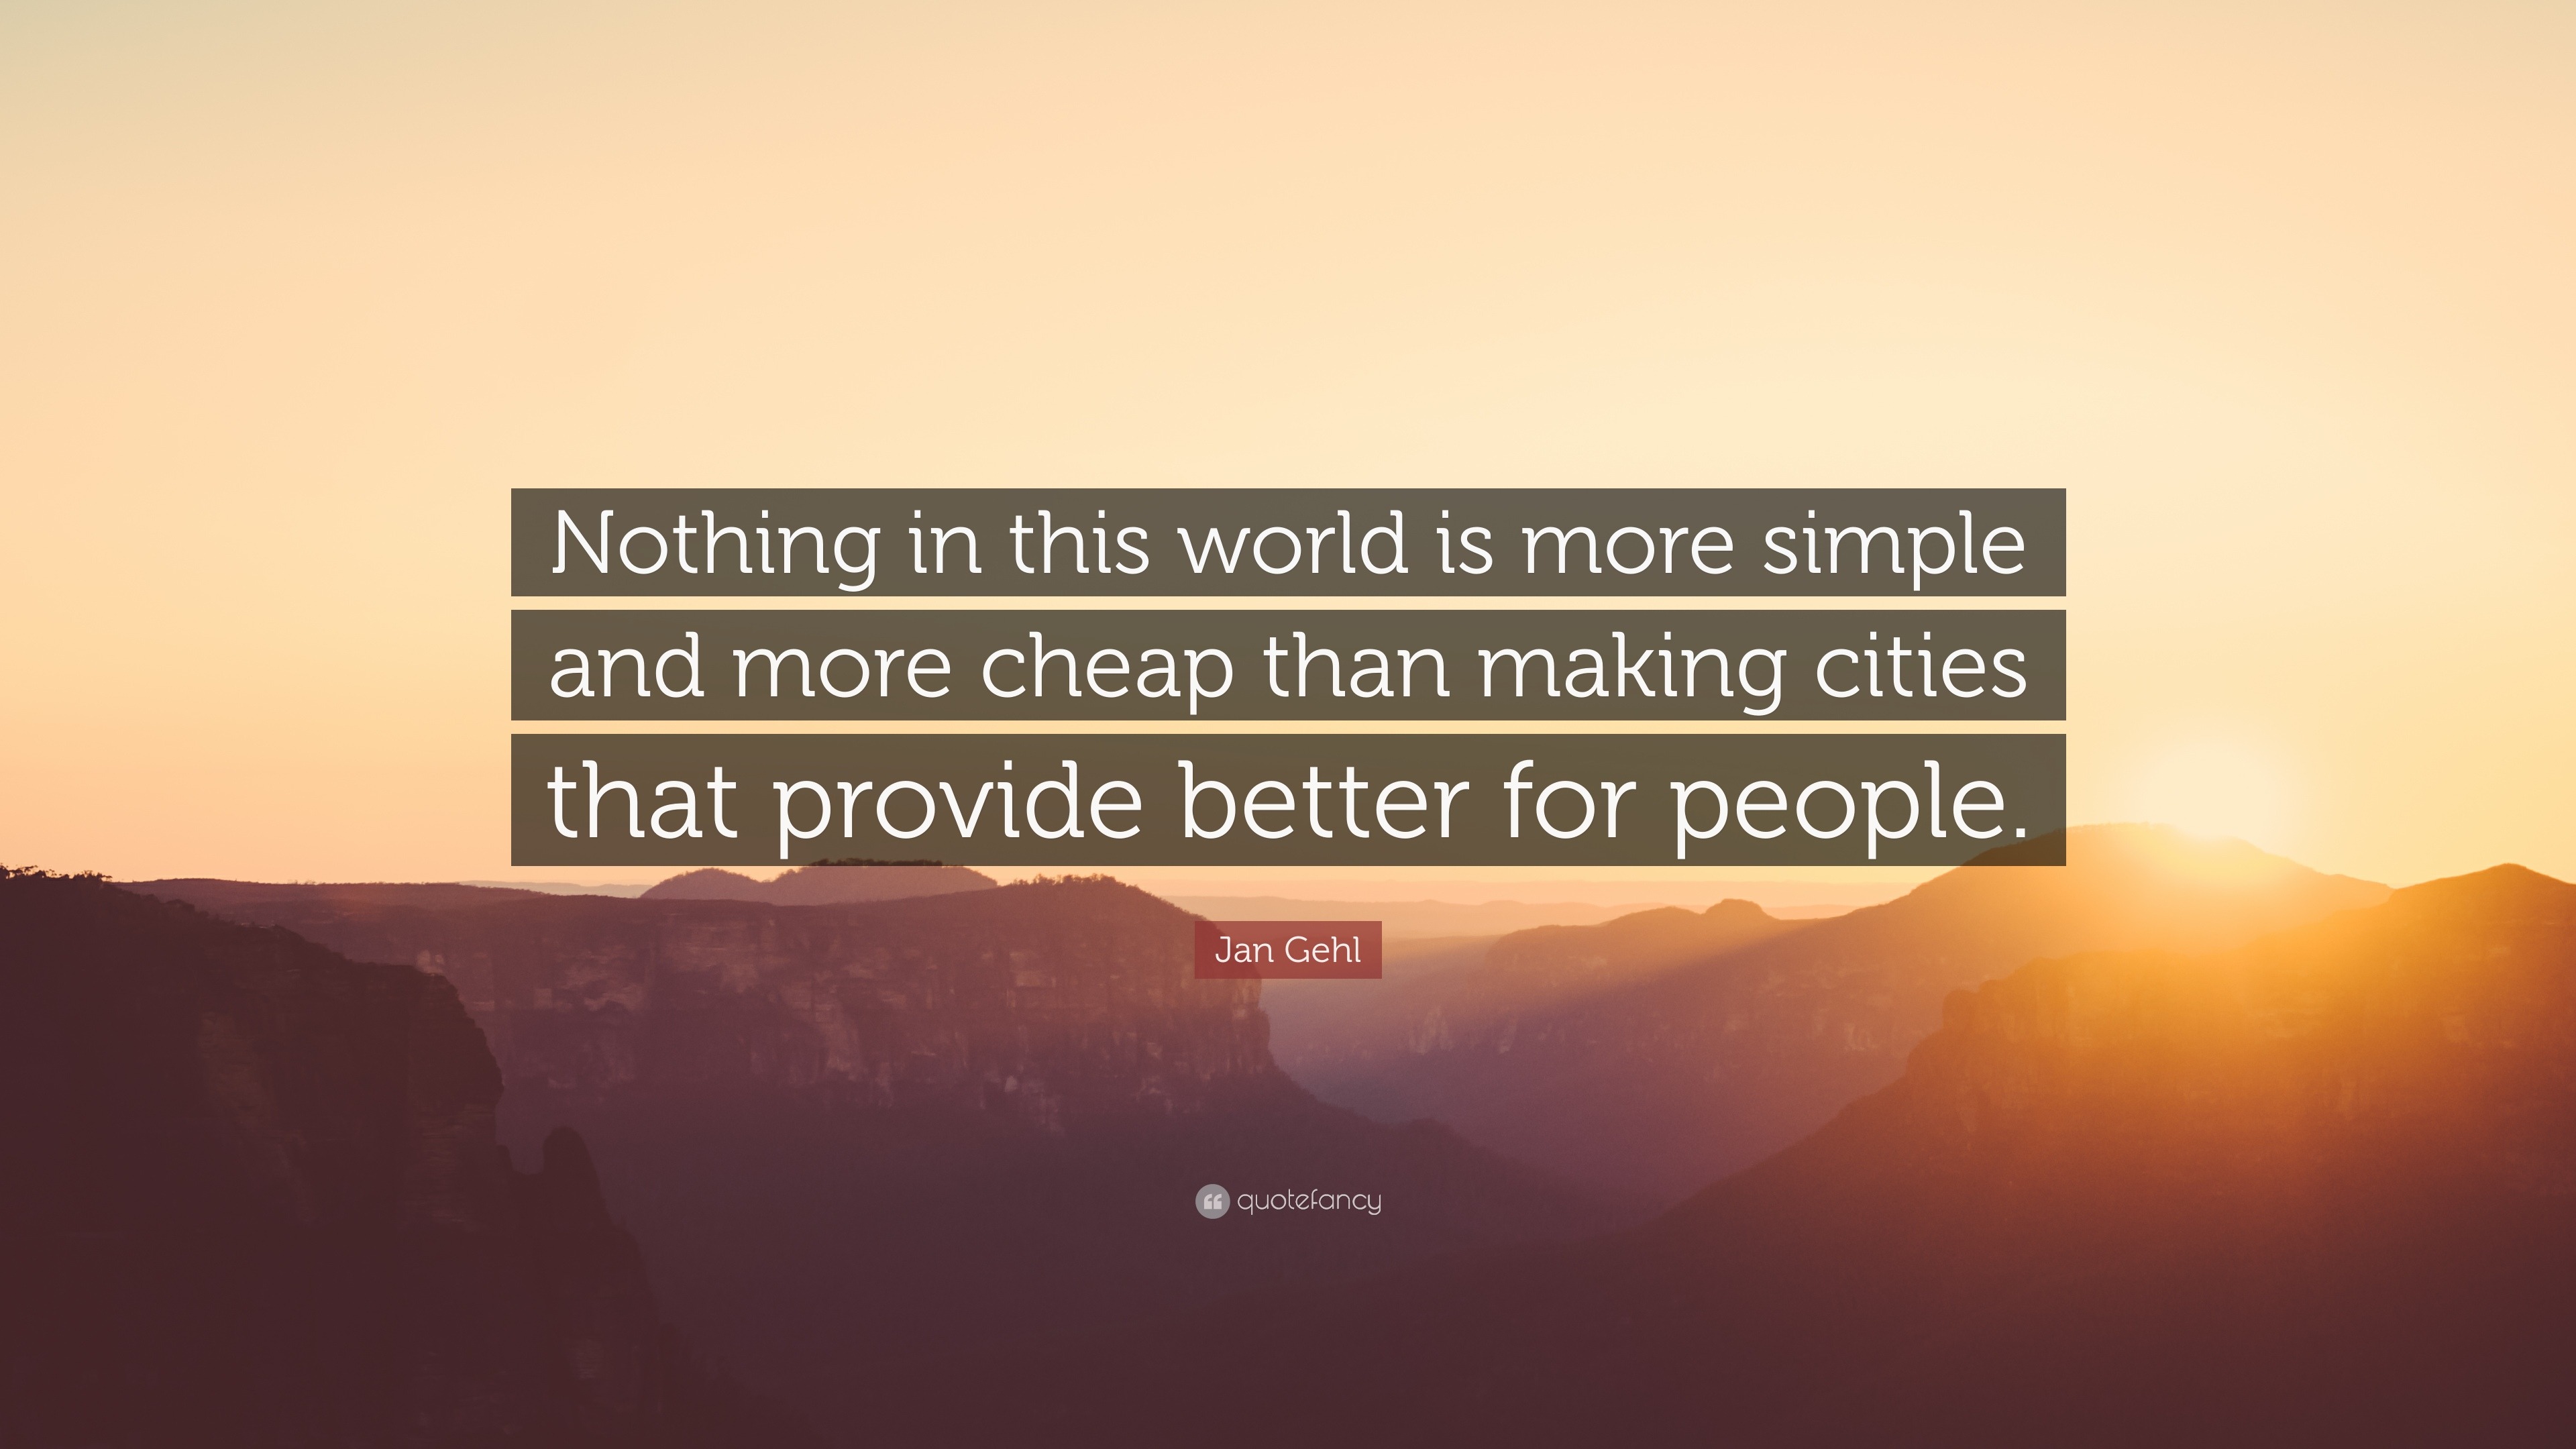 Cities for People by Jan Gehl